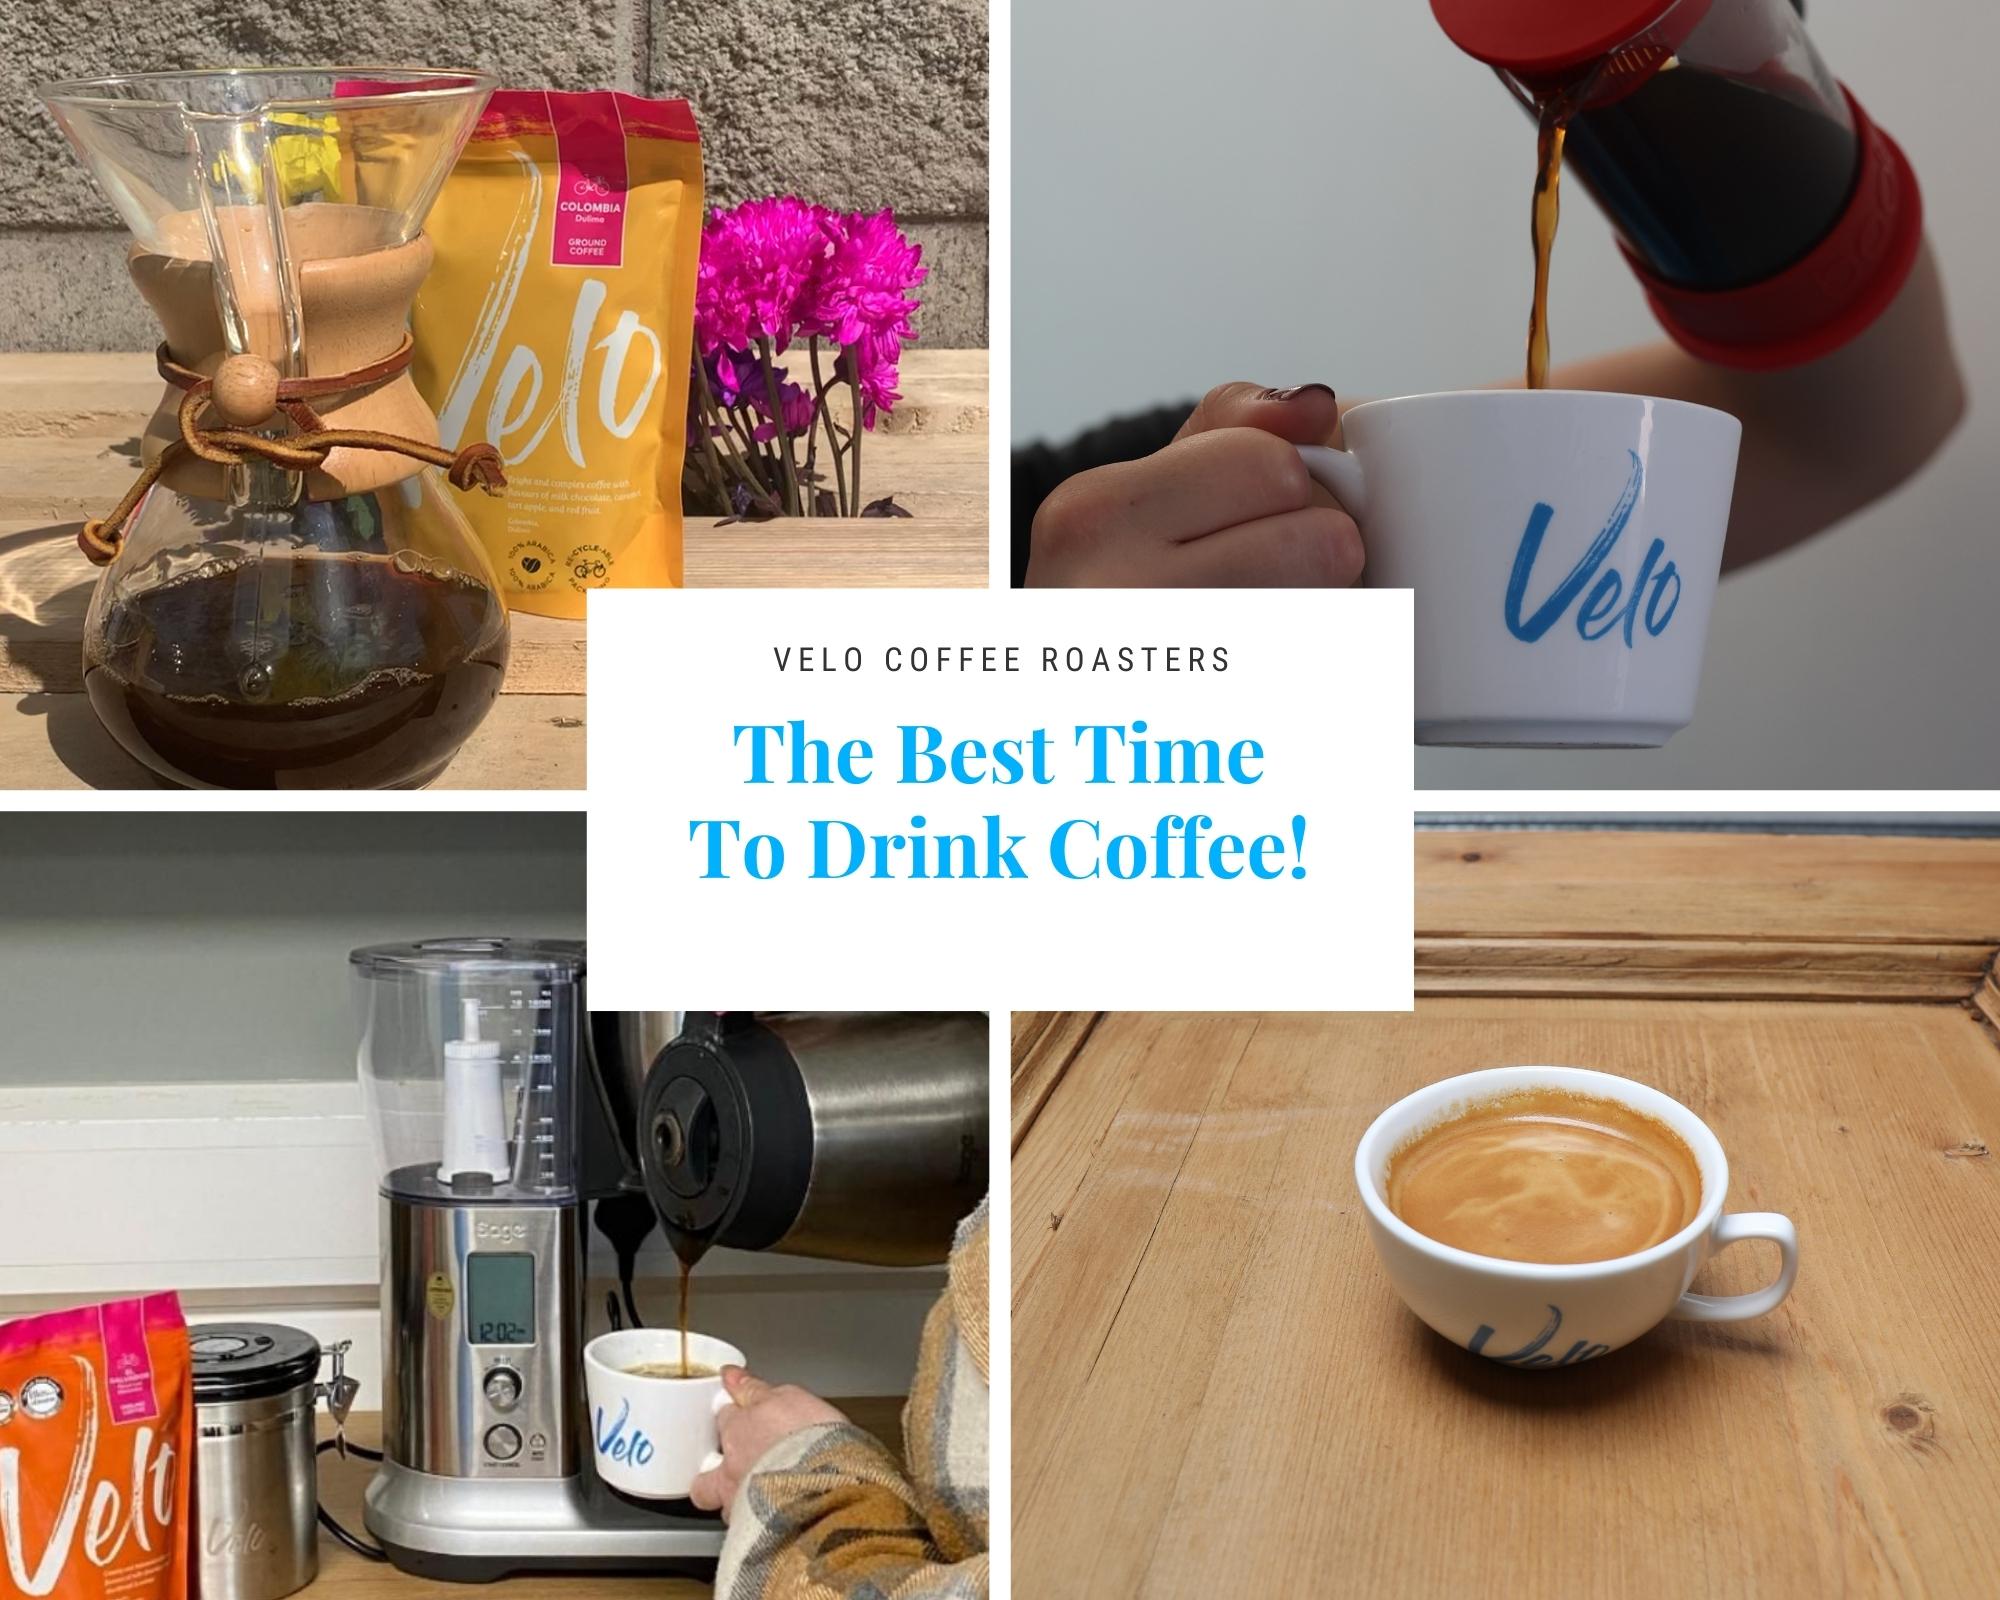 The Best Time To Drink Coffee! - Velo Coffee Roasters